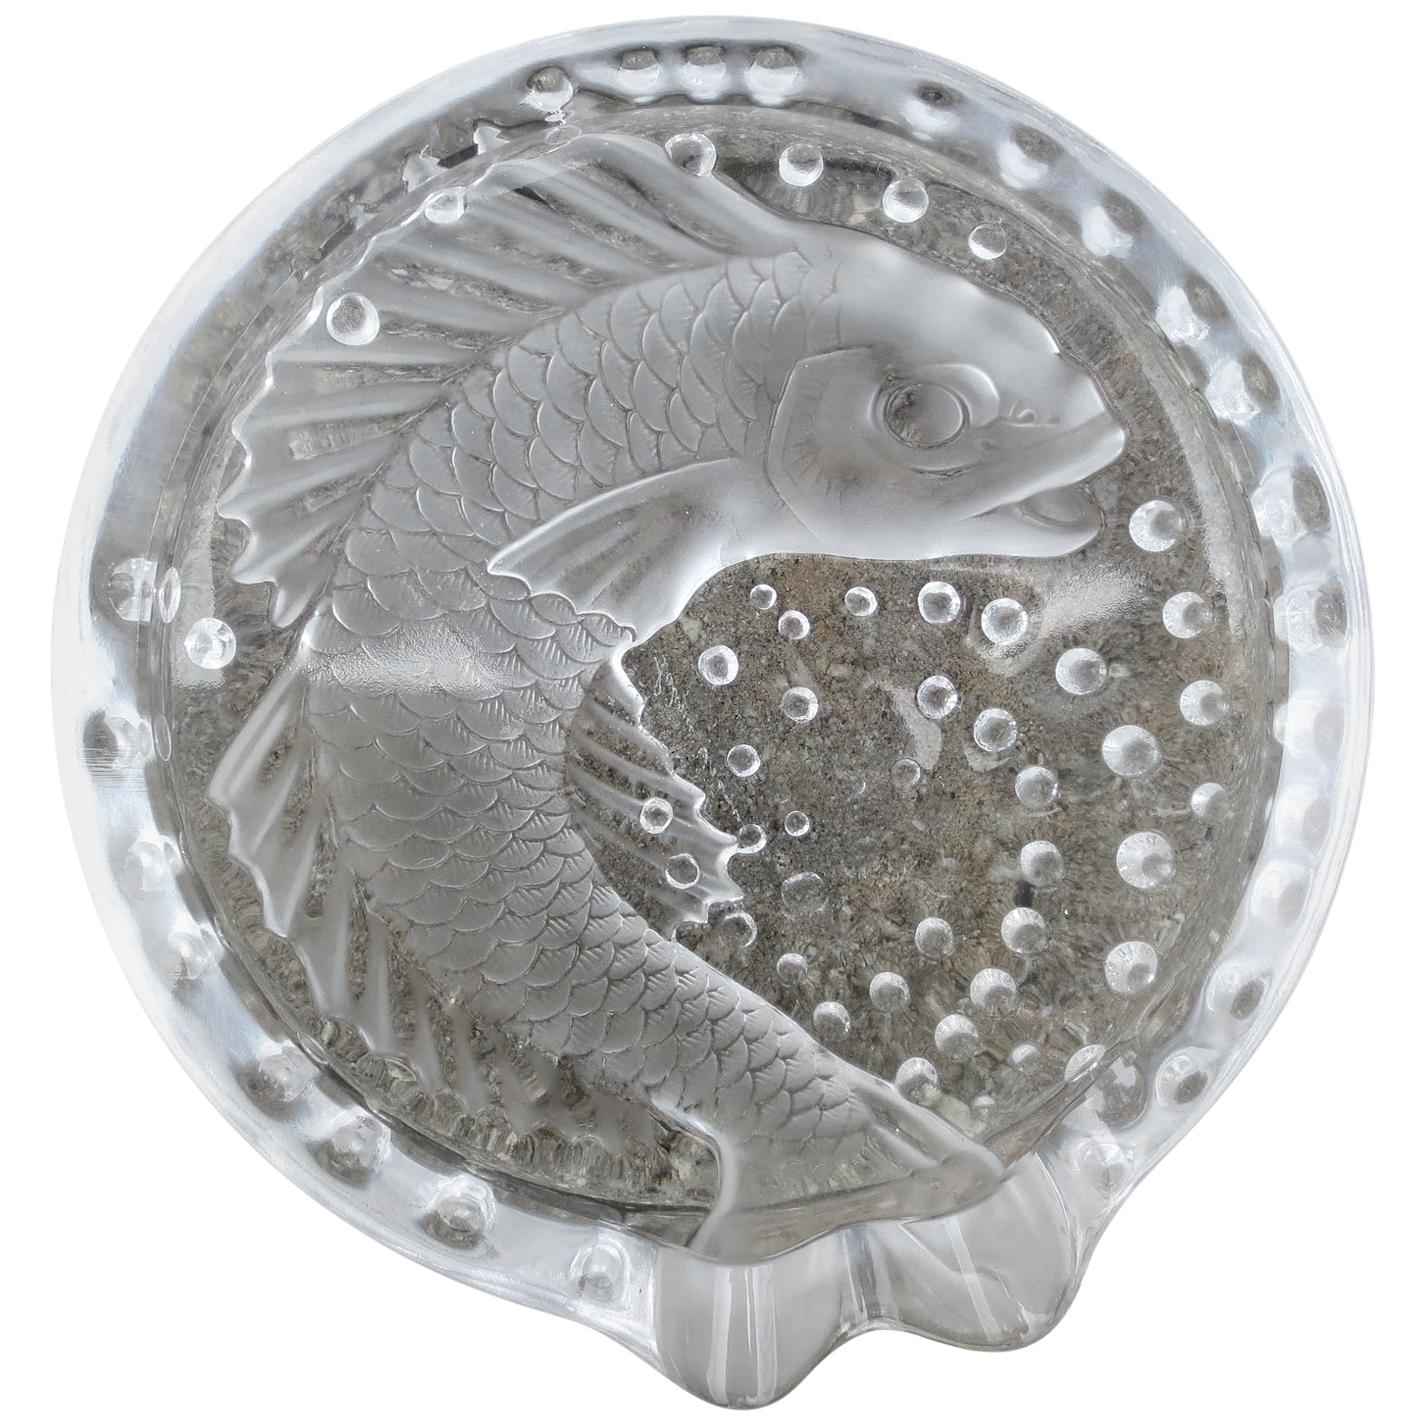 Signed Lalique French Art Glass Fish Dish, Early 20th Century